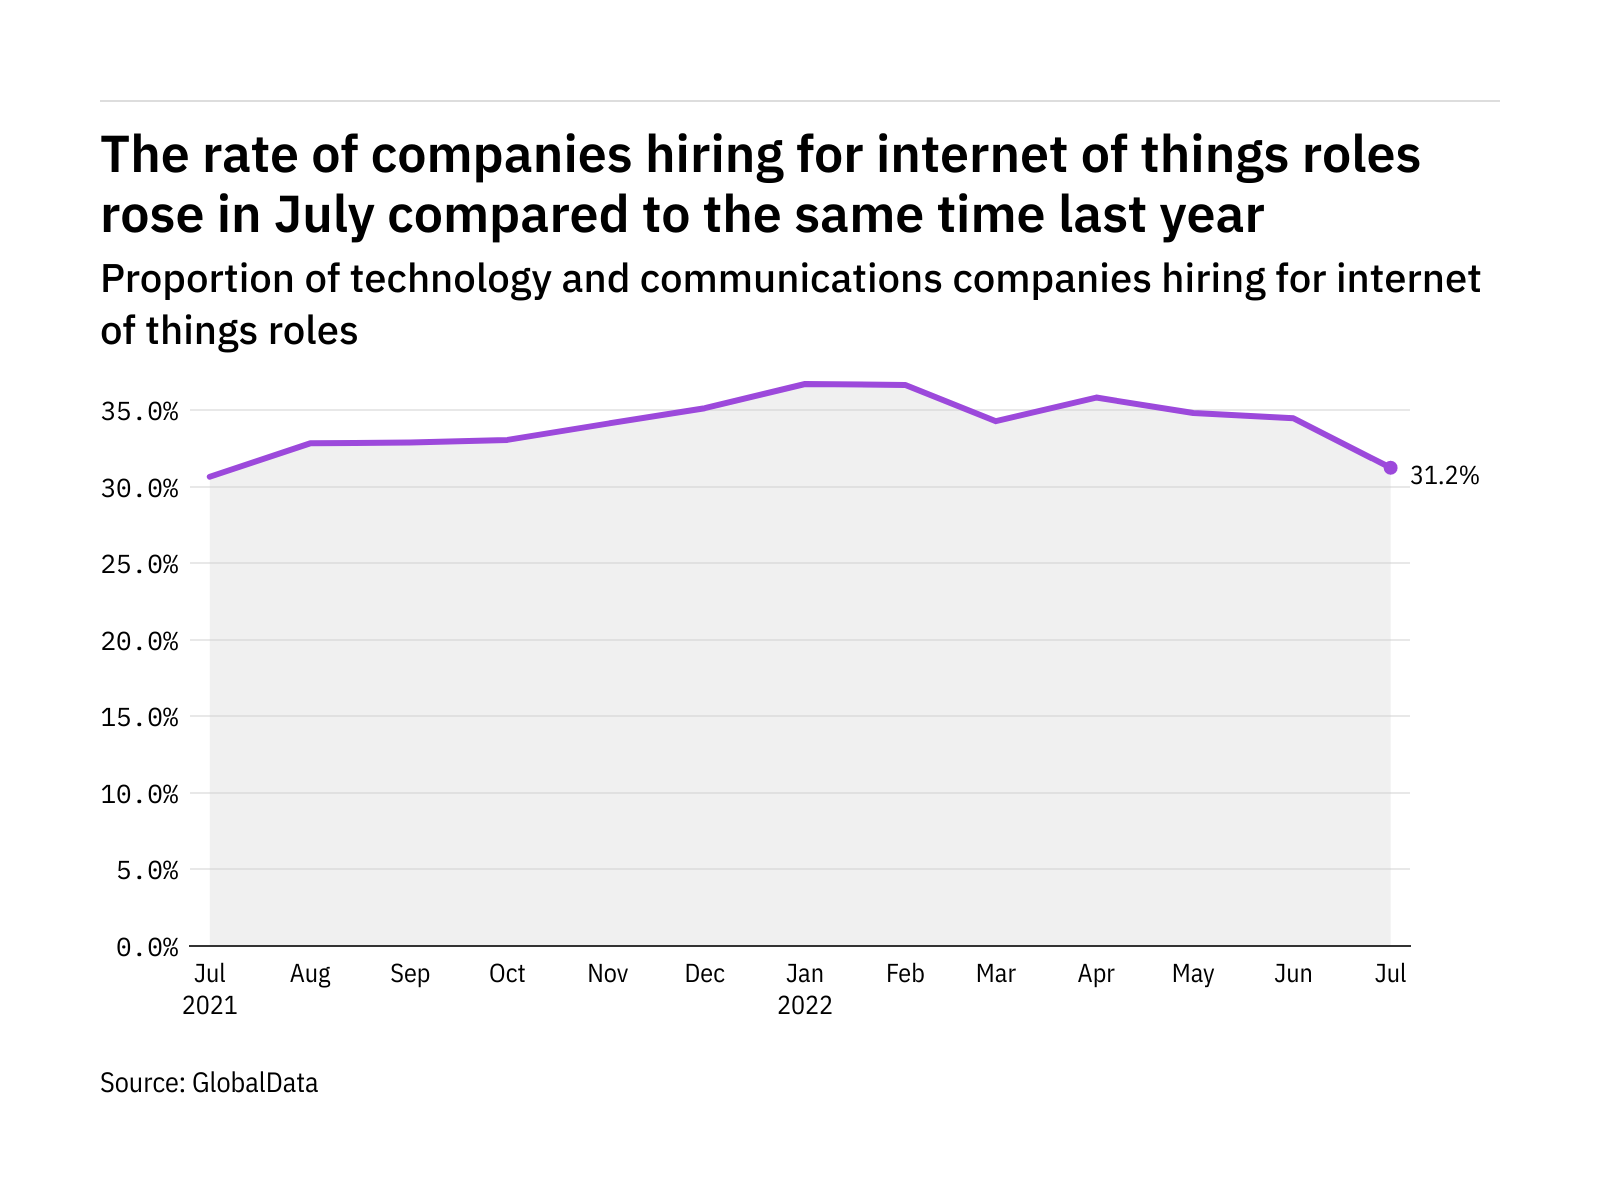 Internet of things hiring levels in the tech industry rose in July 2022